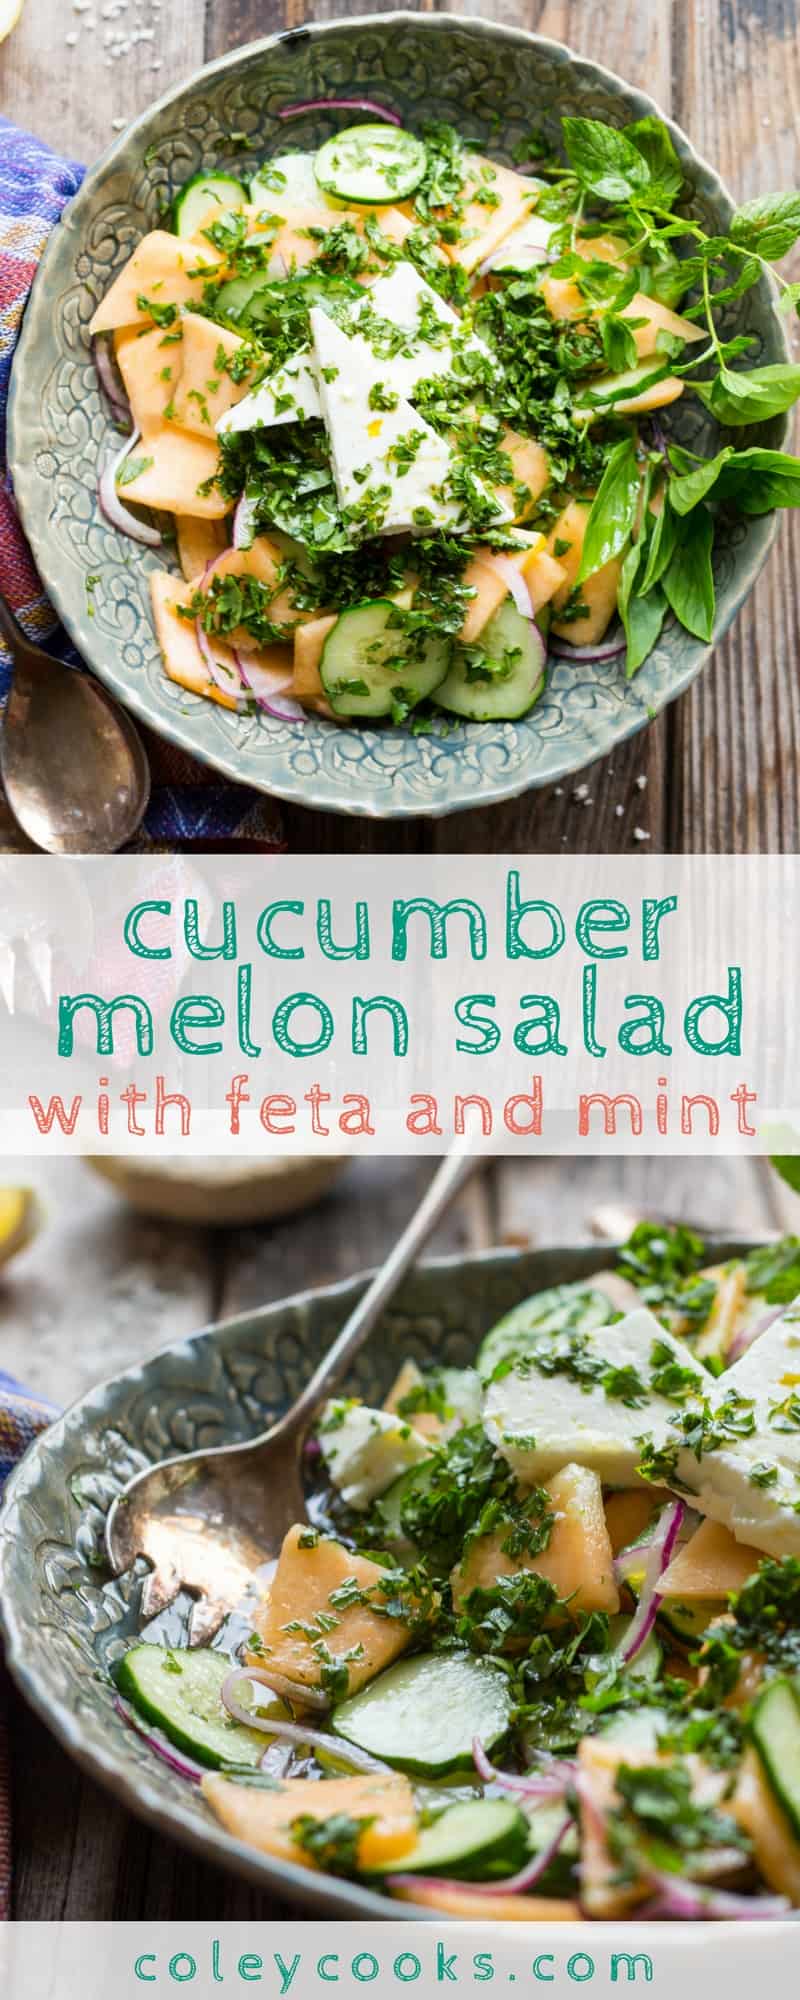 CUCUMBER MELON SALAD with FETA AND MINT | This easy, refreshing Cucumber Melon Salad with Feta + Mint is loaded with crisp cucumber, sweet summer cantaloupe, and salty chards of feta cheese. Perfect easy sumer salad recipe! #glutenfree #vegetarian | ColeyCooks.com